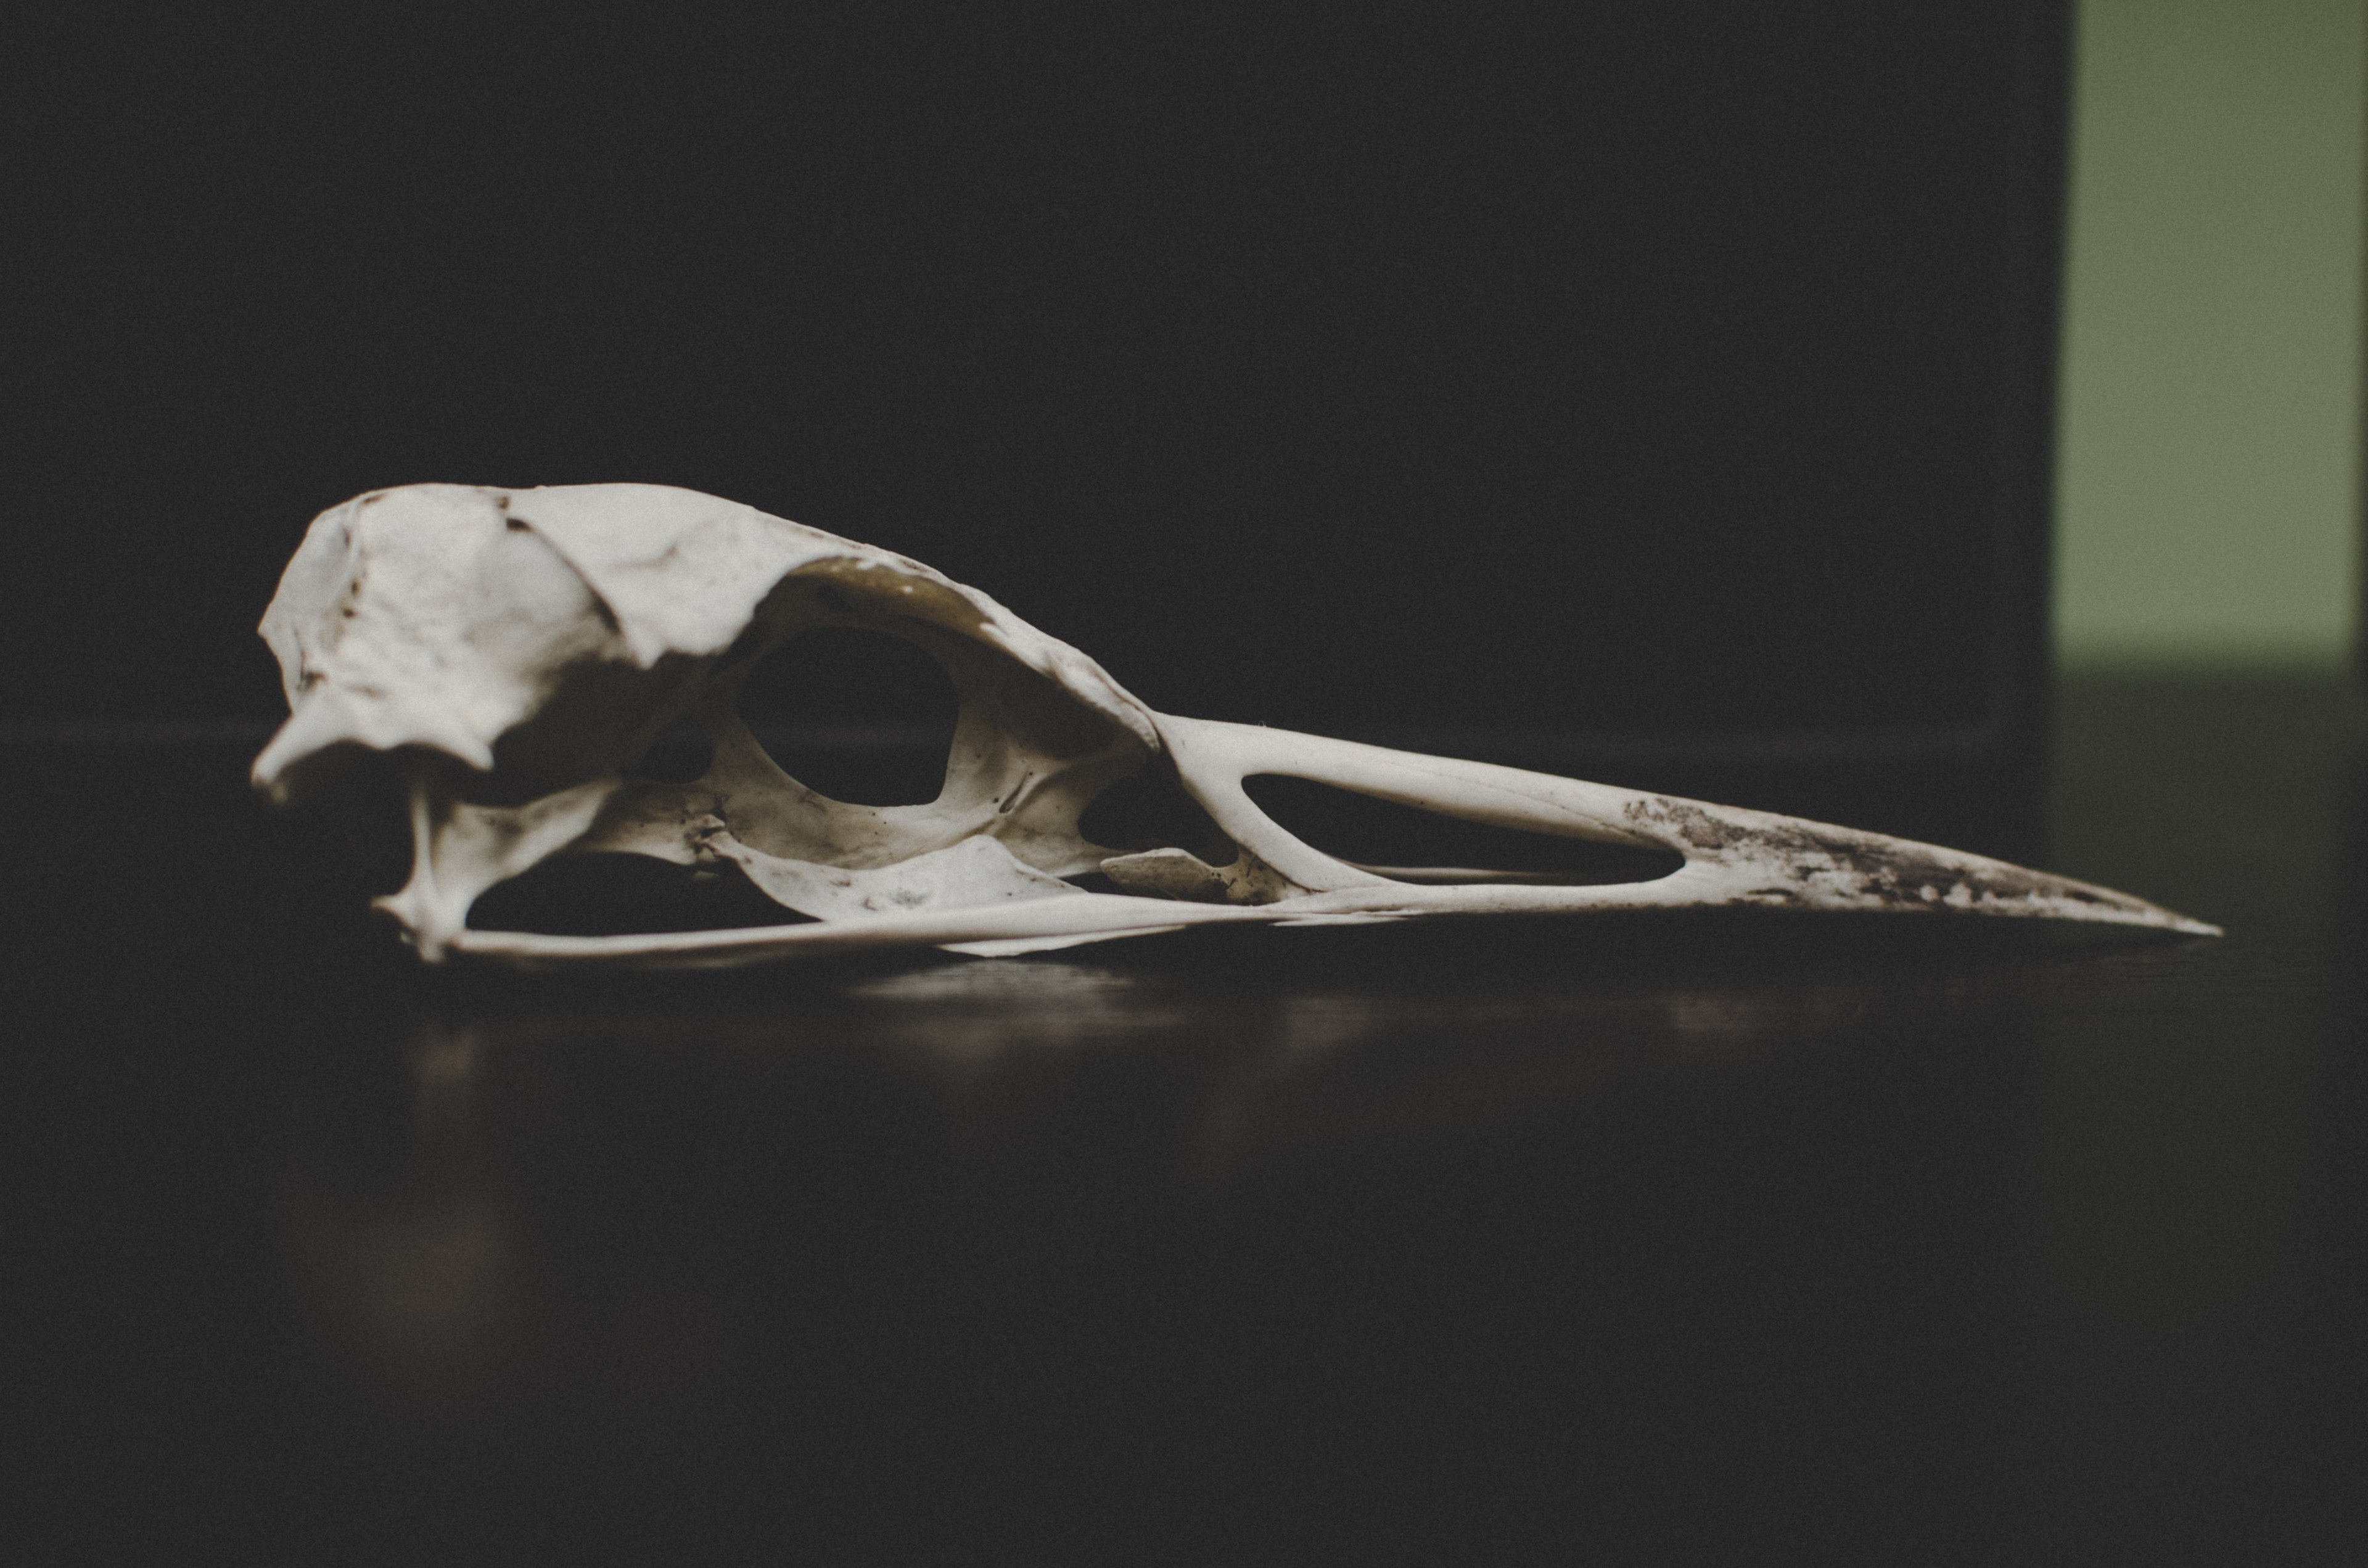 #3840x2543 The Skull Of A Bird With Long Beak In The - Skull , HD Wallpaper & Backgrounds